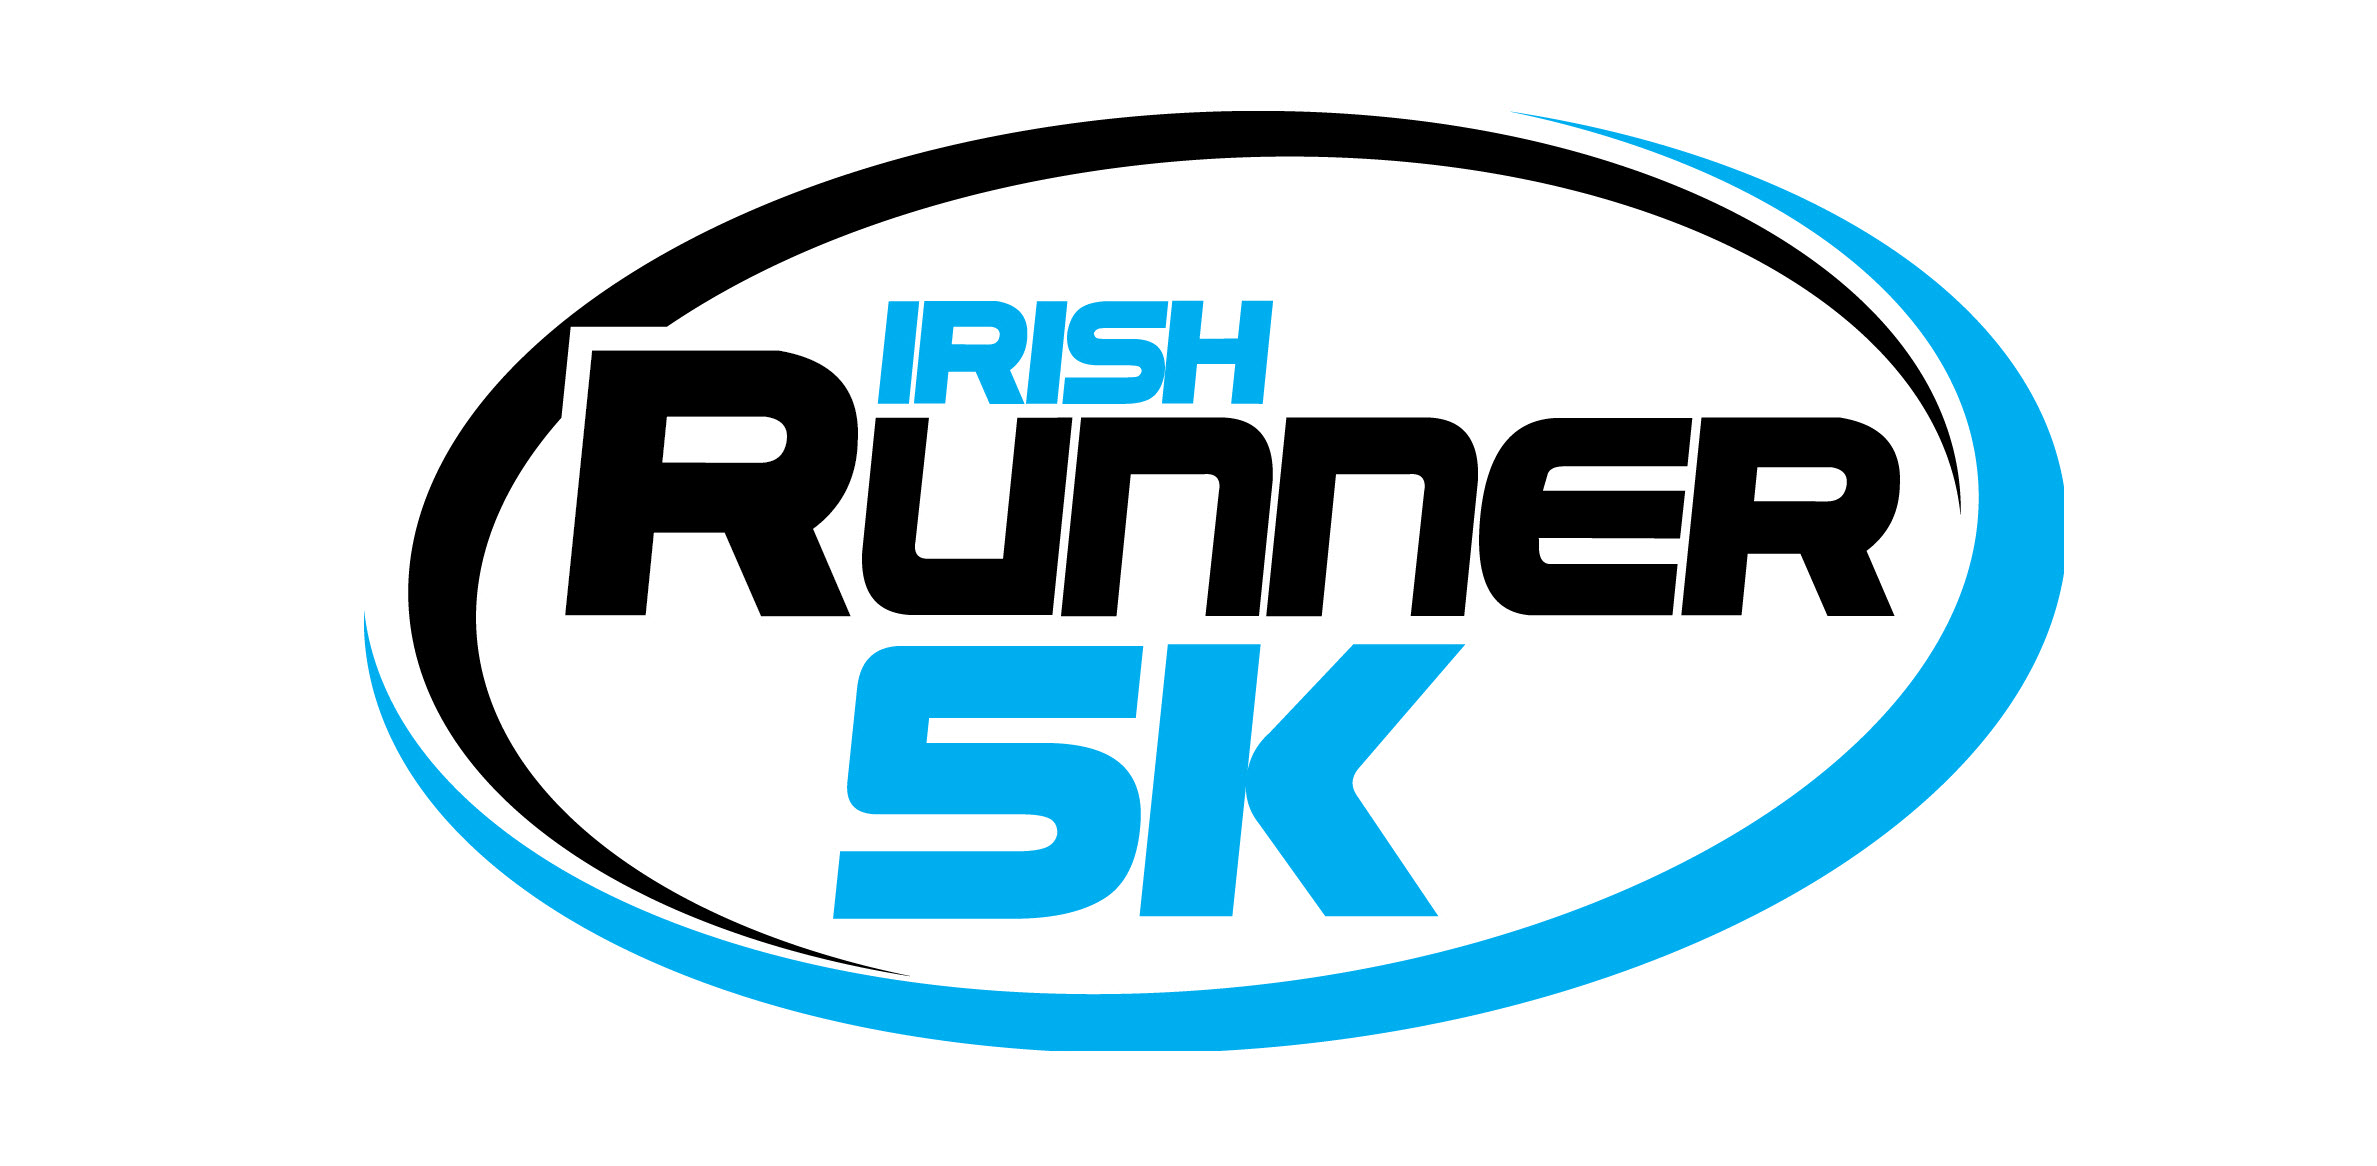 NATIONAL 5K ACTION SET TO SIZZLE IN PHOENIX PARK